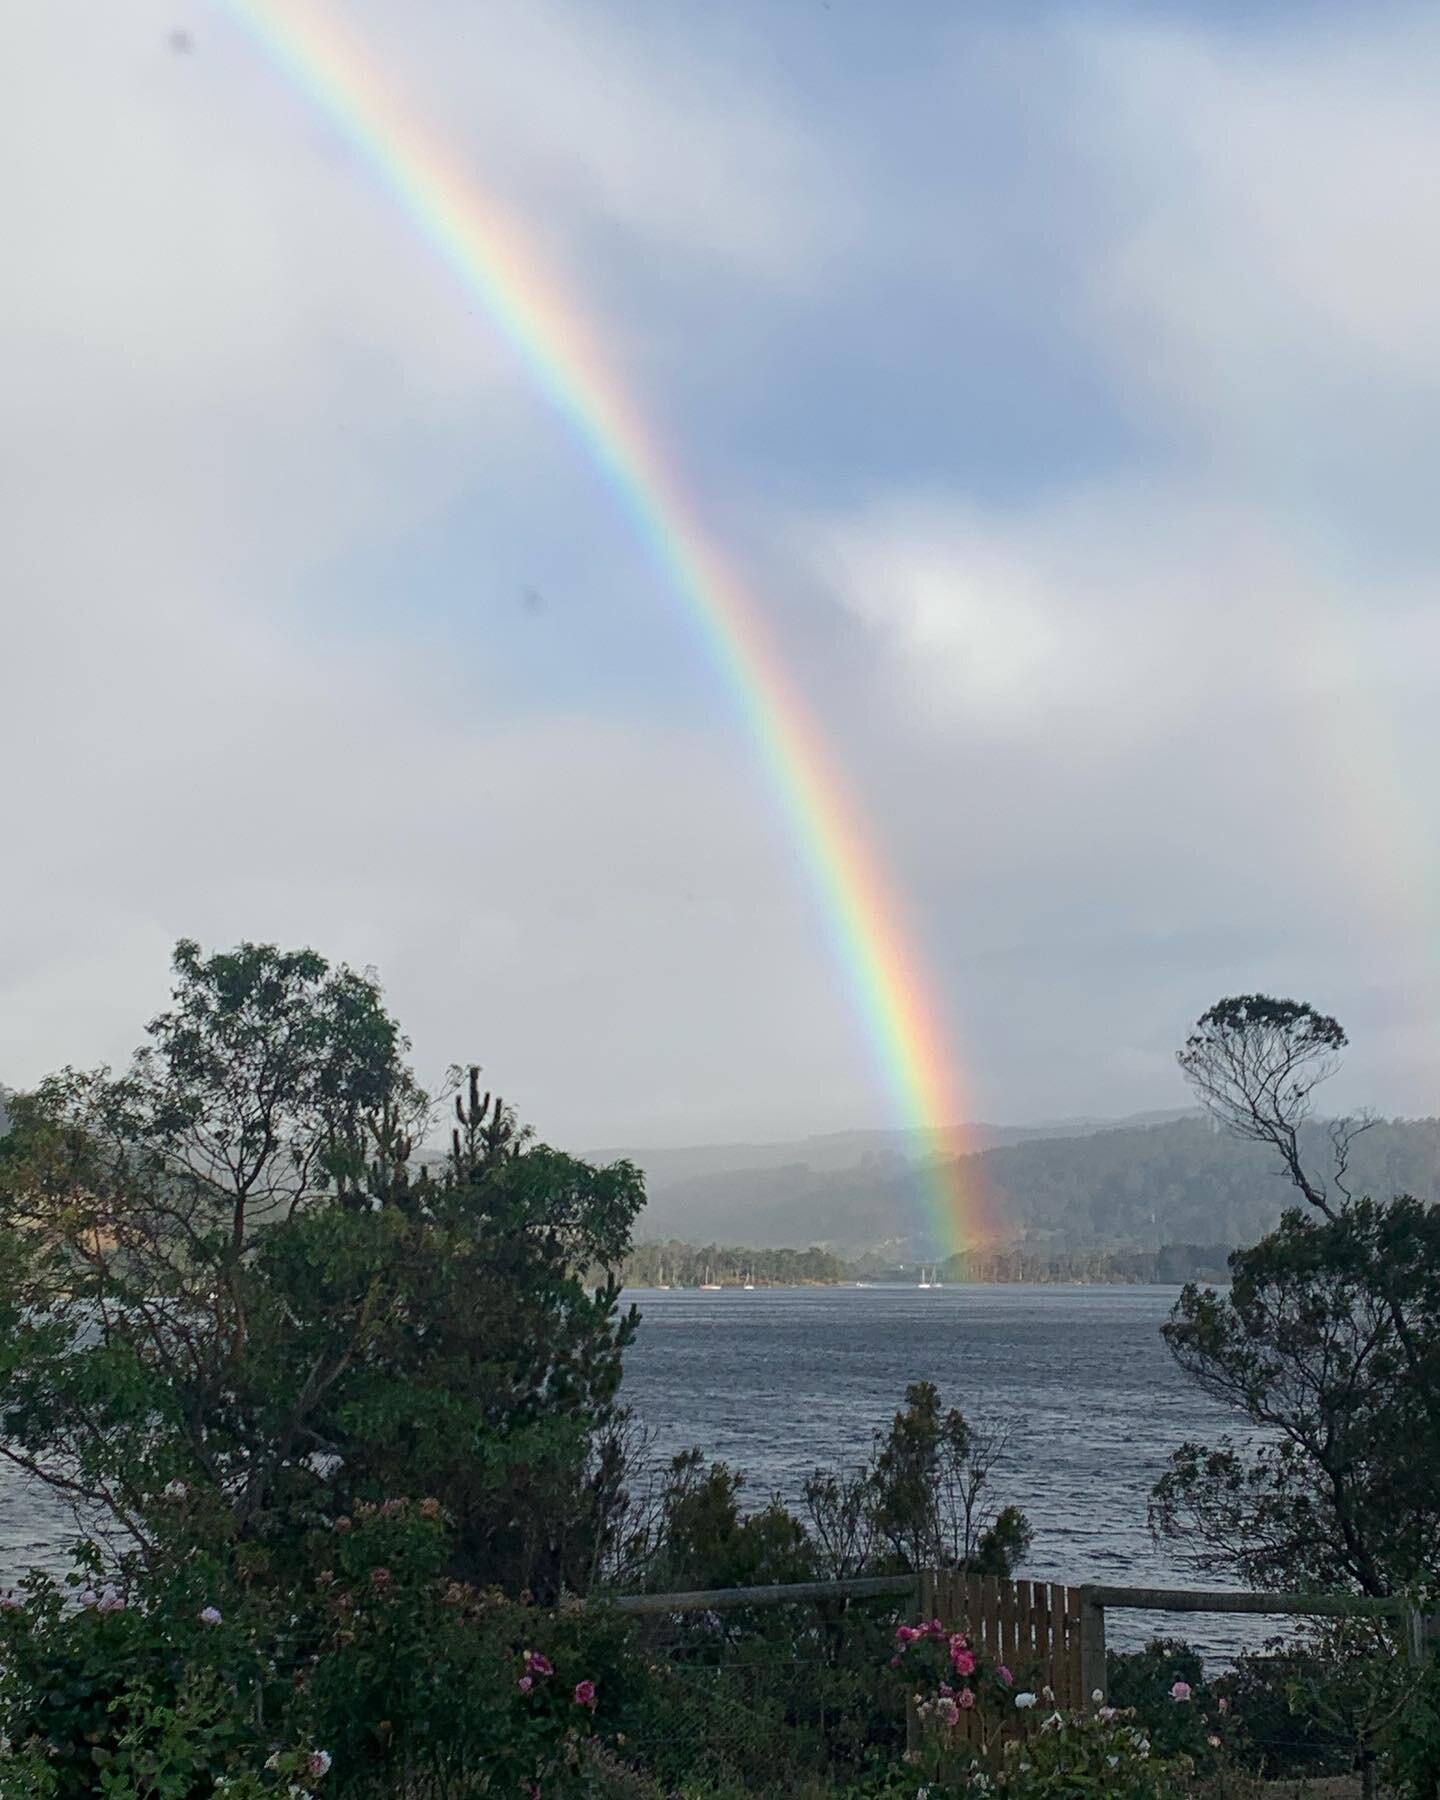 Rainbows on the river and raindrops on the windows. A typical summer morning in Tassie!